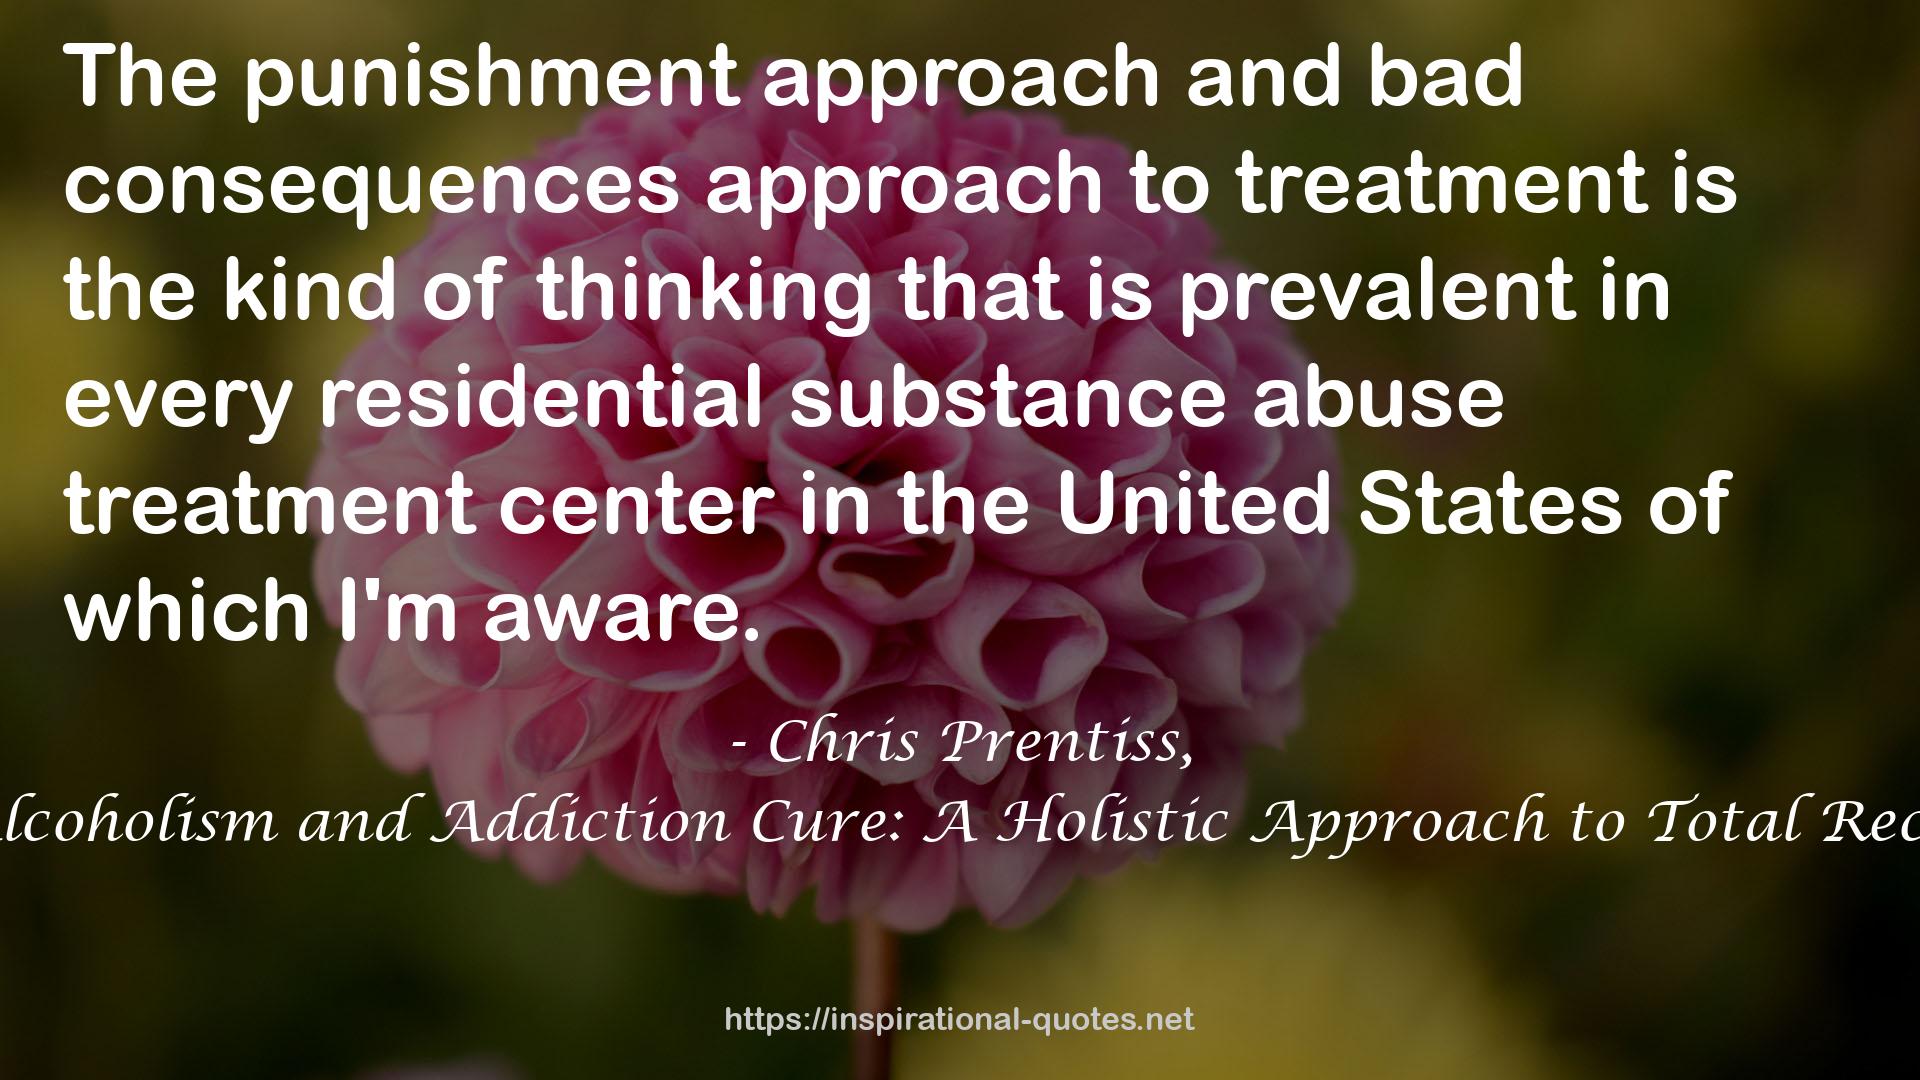 every residential substance abuse treatment center  QUOTES